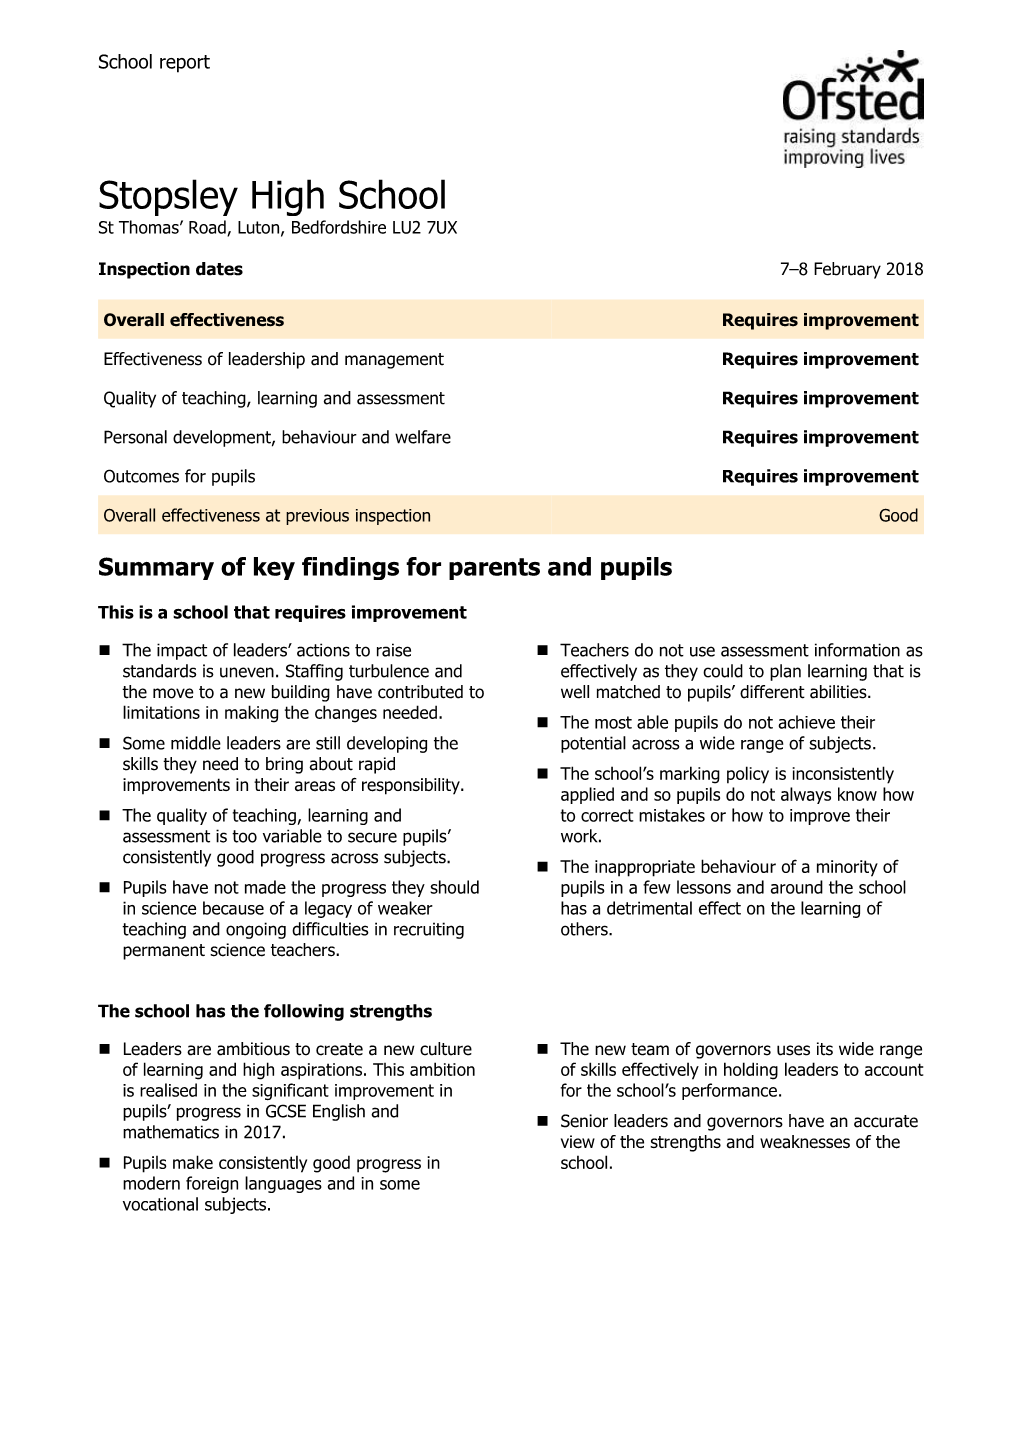 Stopsley High School Ofsted Report February 2018